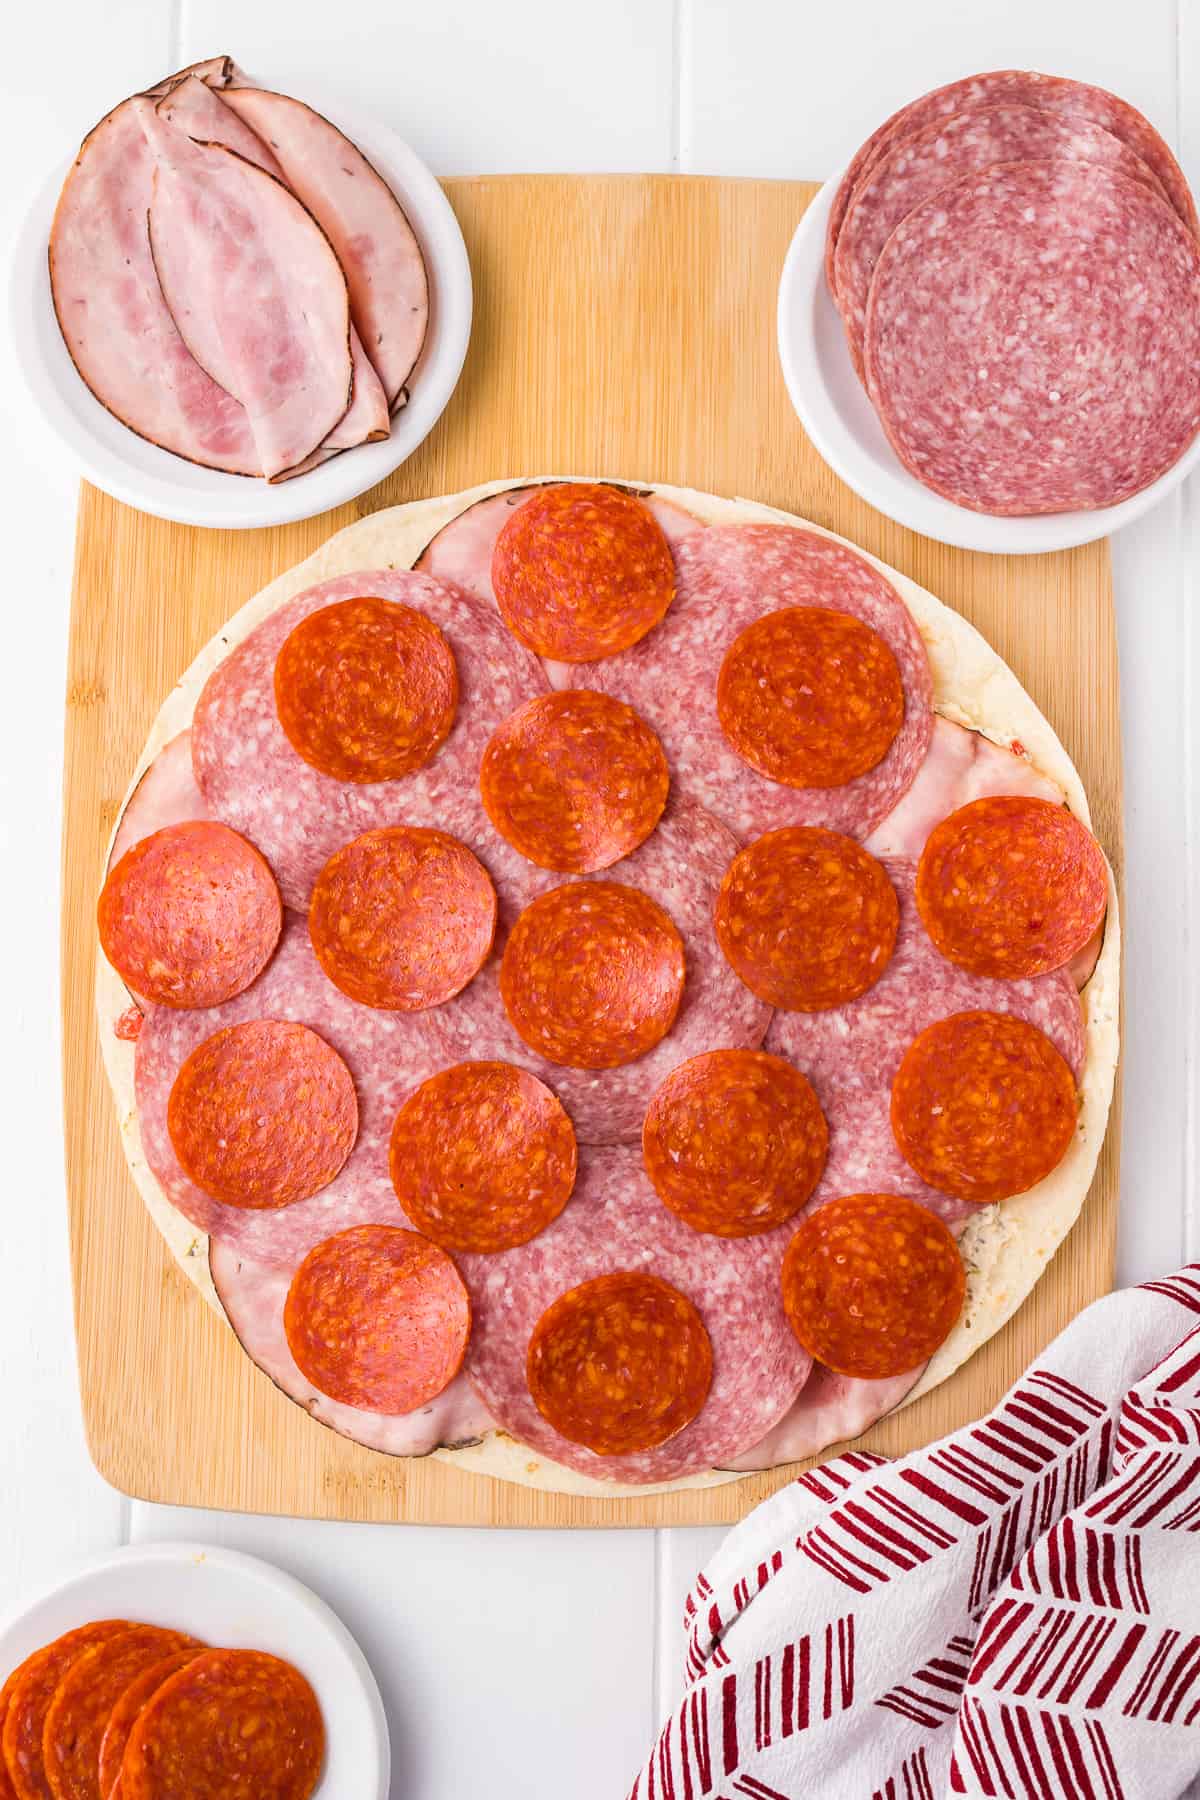 Adding pepperoni to the italian pinwheel tortilla from above on a cutting board with more Italian meats on plates nearby.